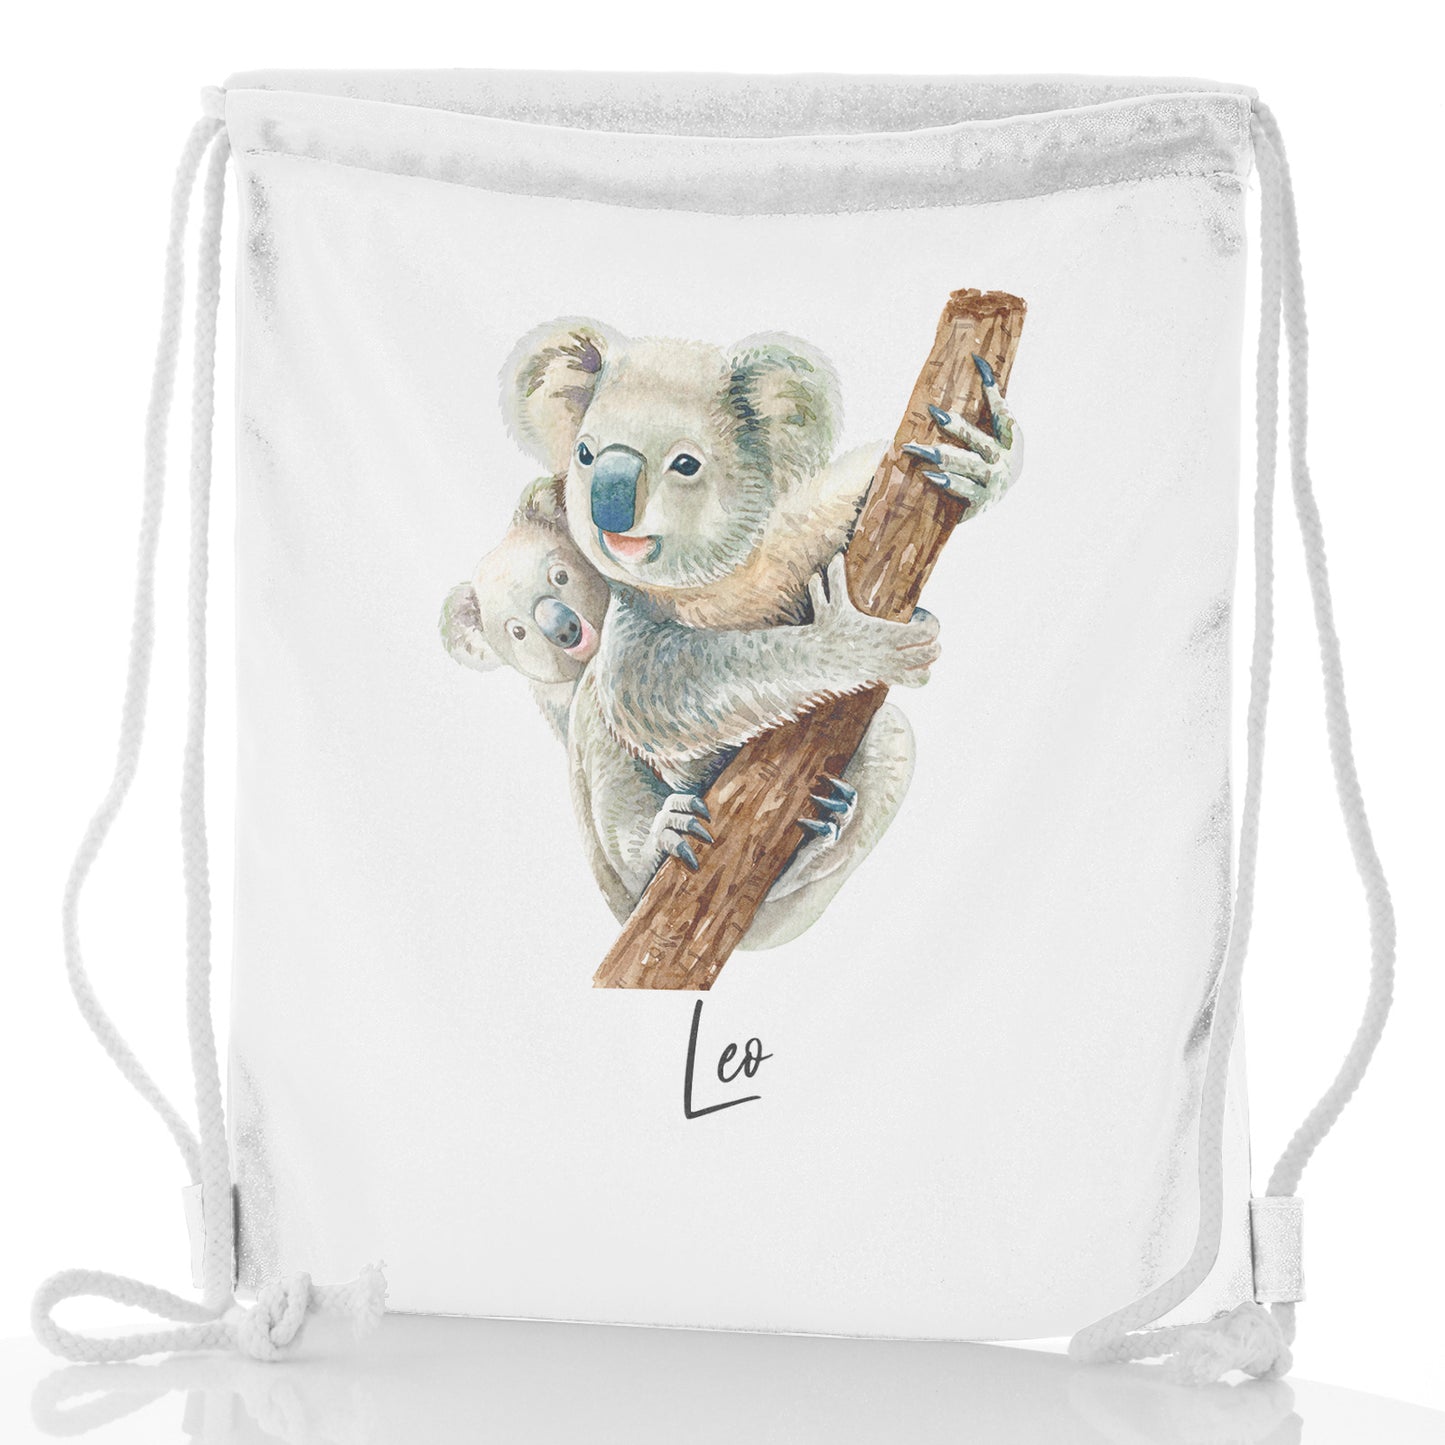 Personalised Glitter Drawstring Backpack with Welcoming Text and Climbing Mum and Baby Koalas